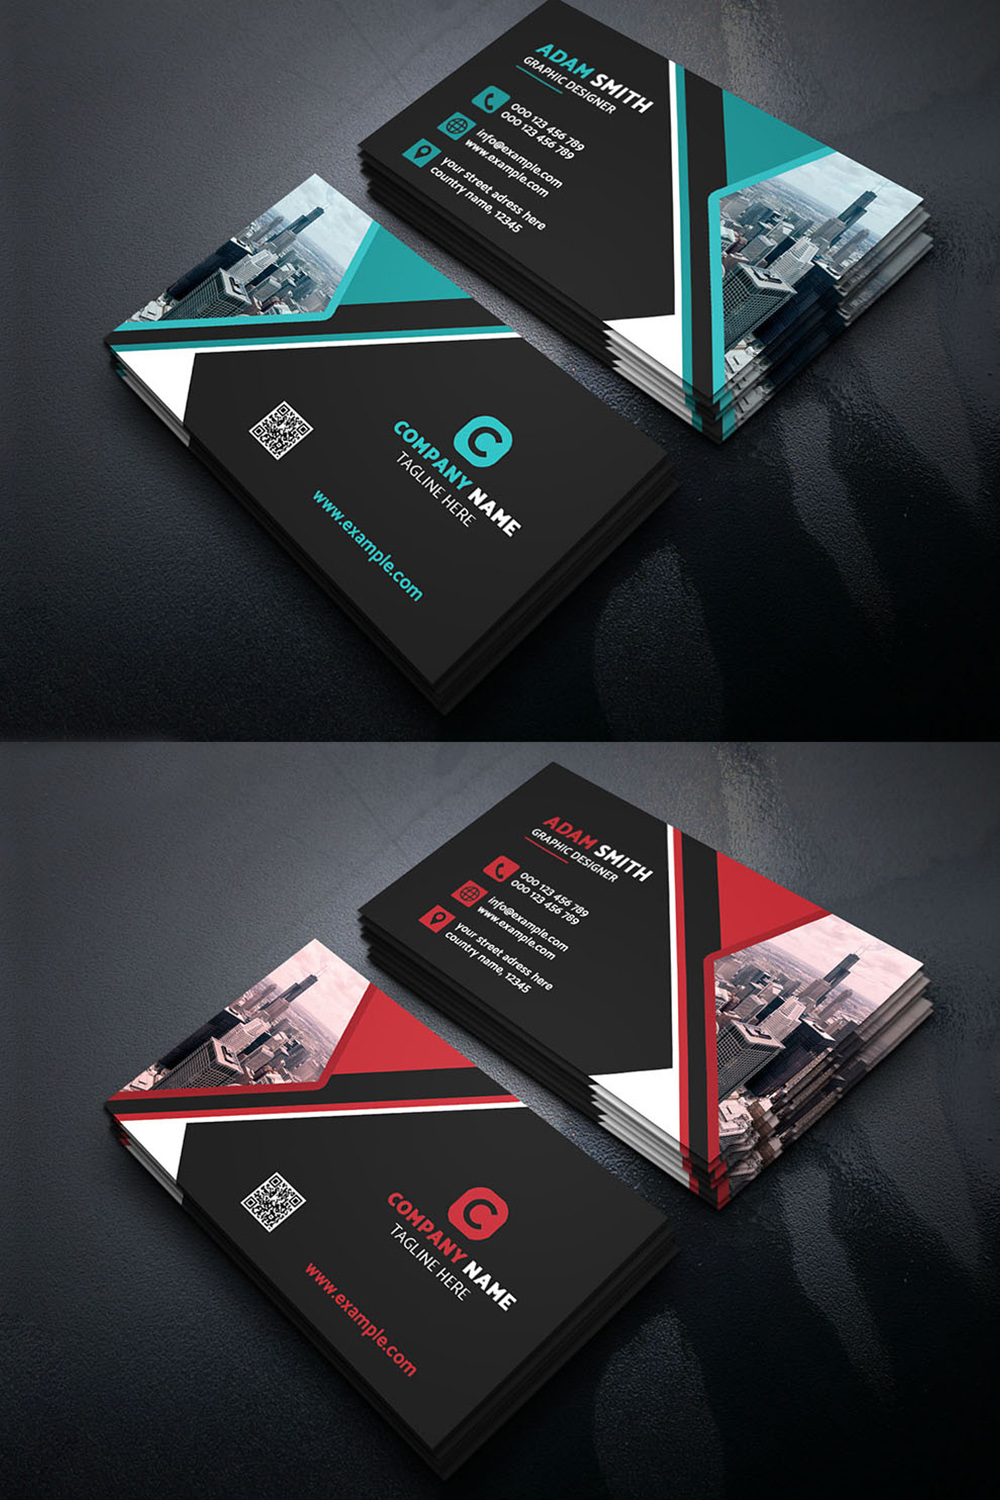 Color Corporate and Modern Business Card Pinterest image.